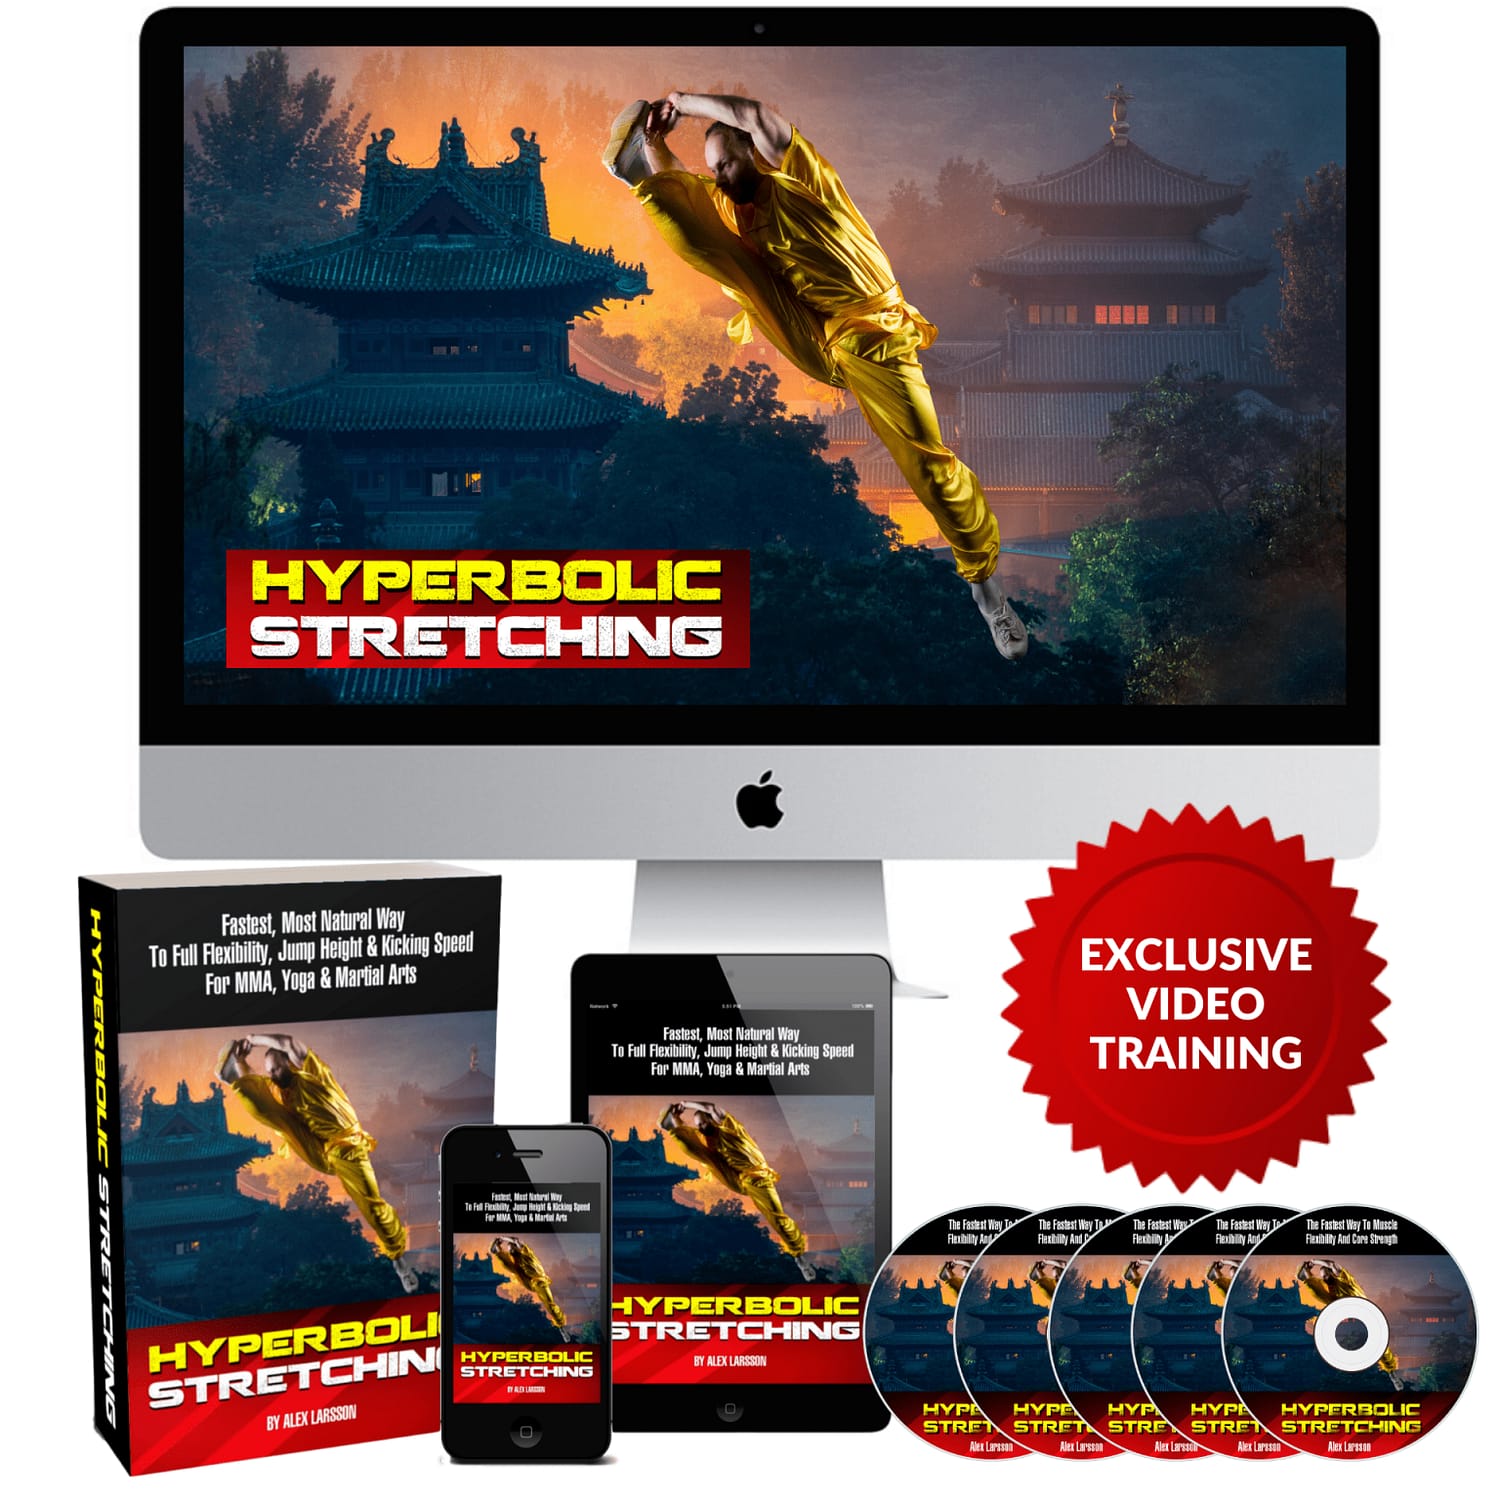 In-Depth Hyperbolic Stretching Review